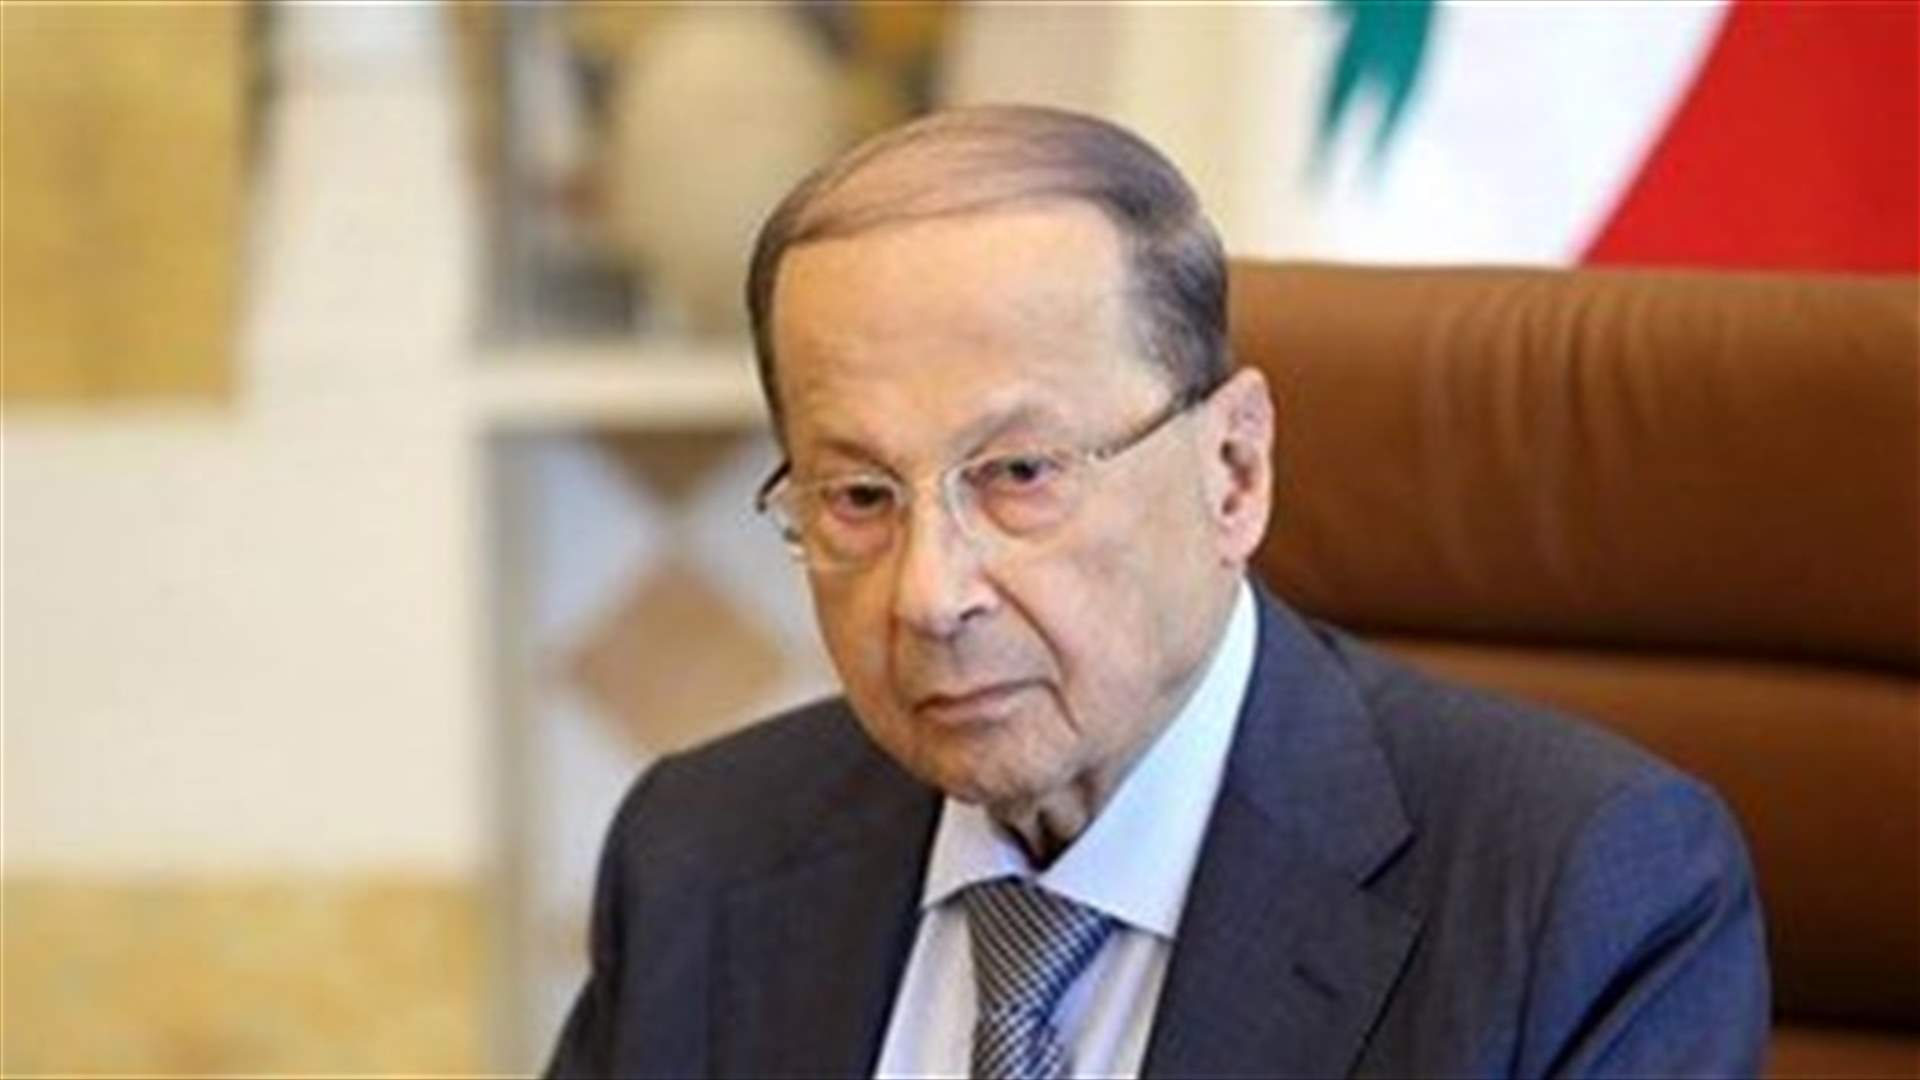 Lebanon&#39;s Aoun: protests show &quot;people&#39;s pain&quot;, corruption charges not all fair